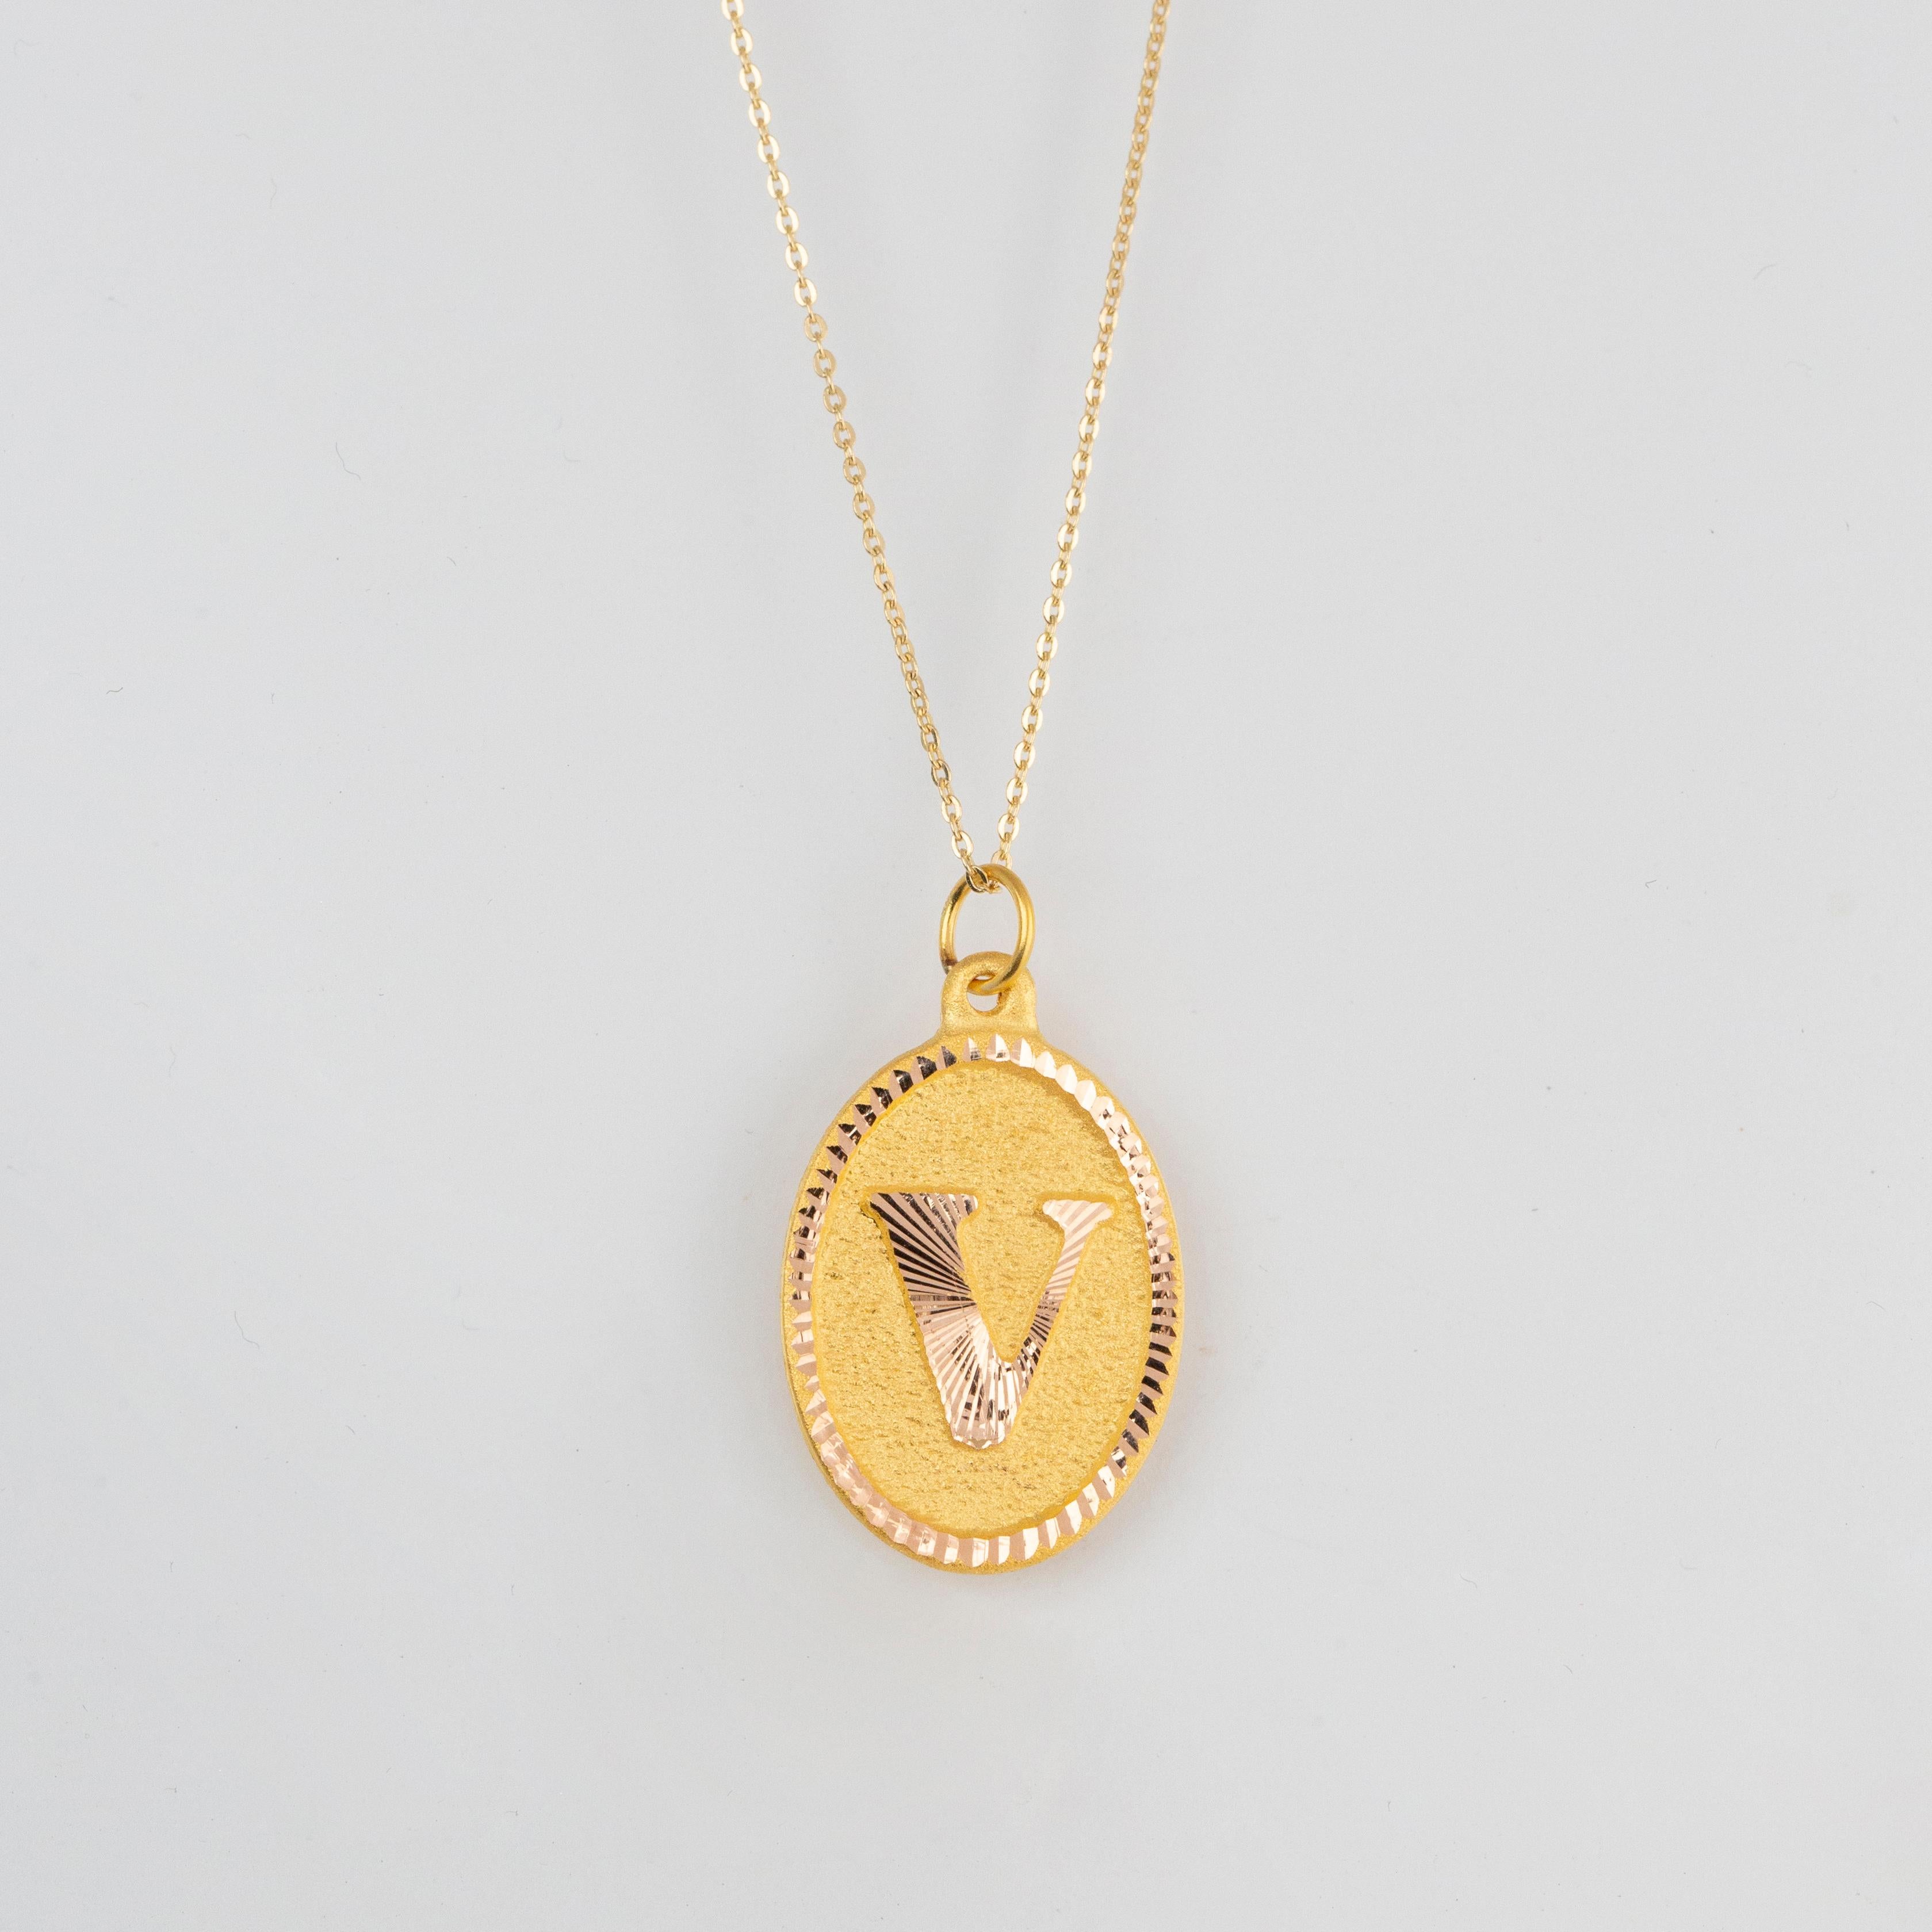 14K Gold Necklaces, Letter Necklace Models, Letter V Gold Necklace-Gift Necklace Models, Daily Necklaces, Letter Jewelry

It's a manual labor product. 'Handmade'. Fashionable product.

This necklace was made with quality materials and excellent